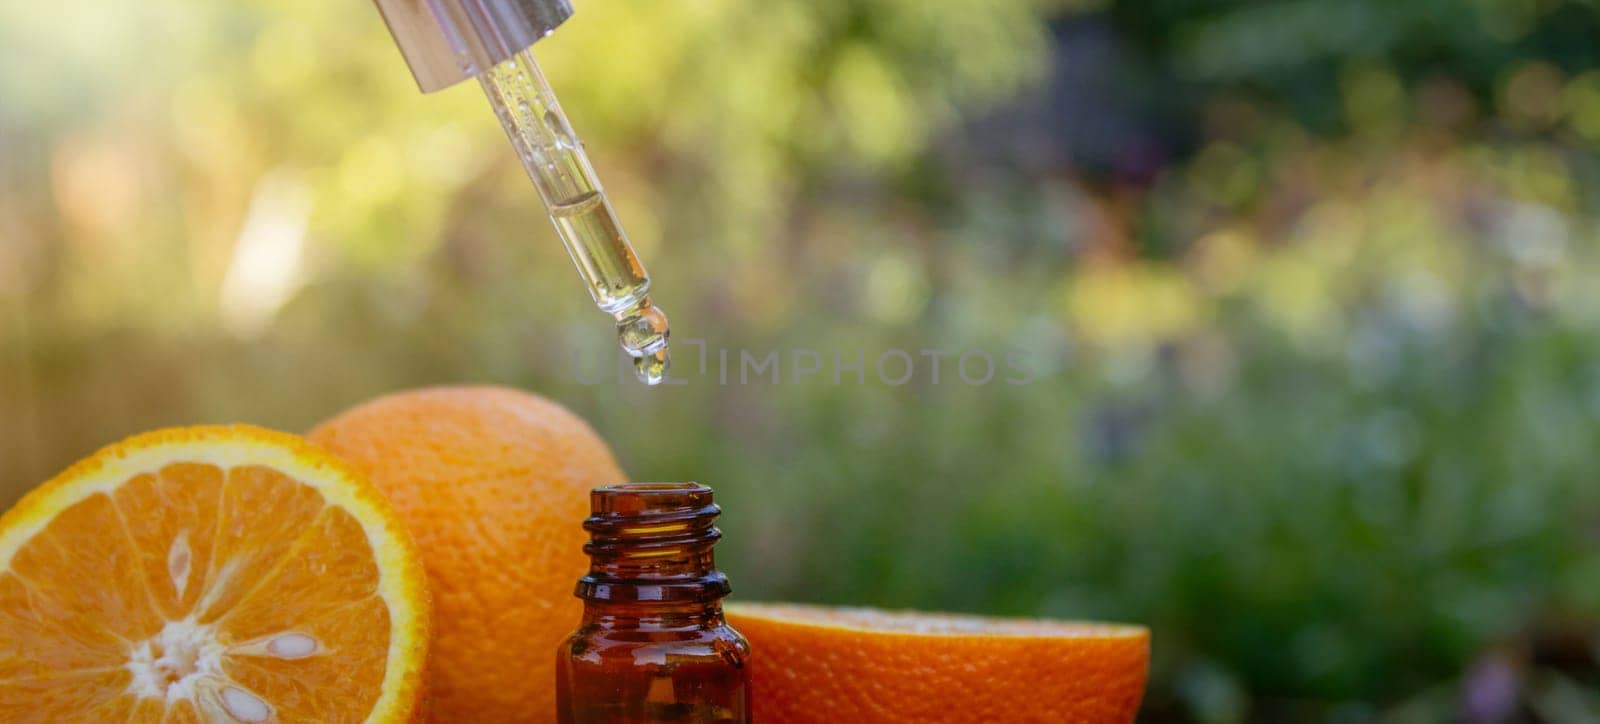 Essential extract of orange oil in a small bottle.